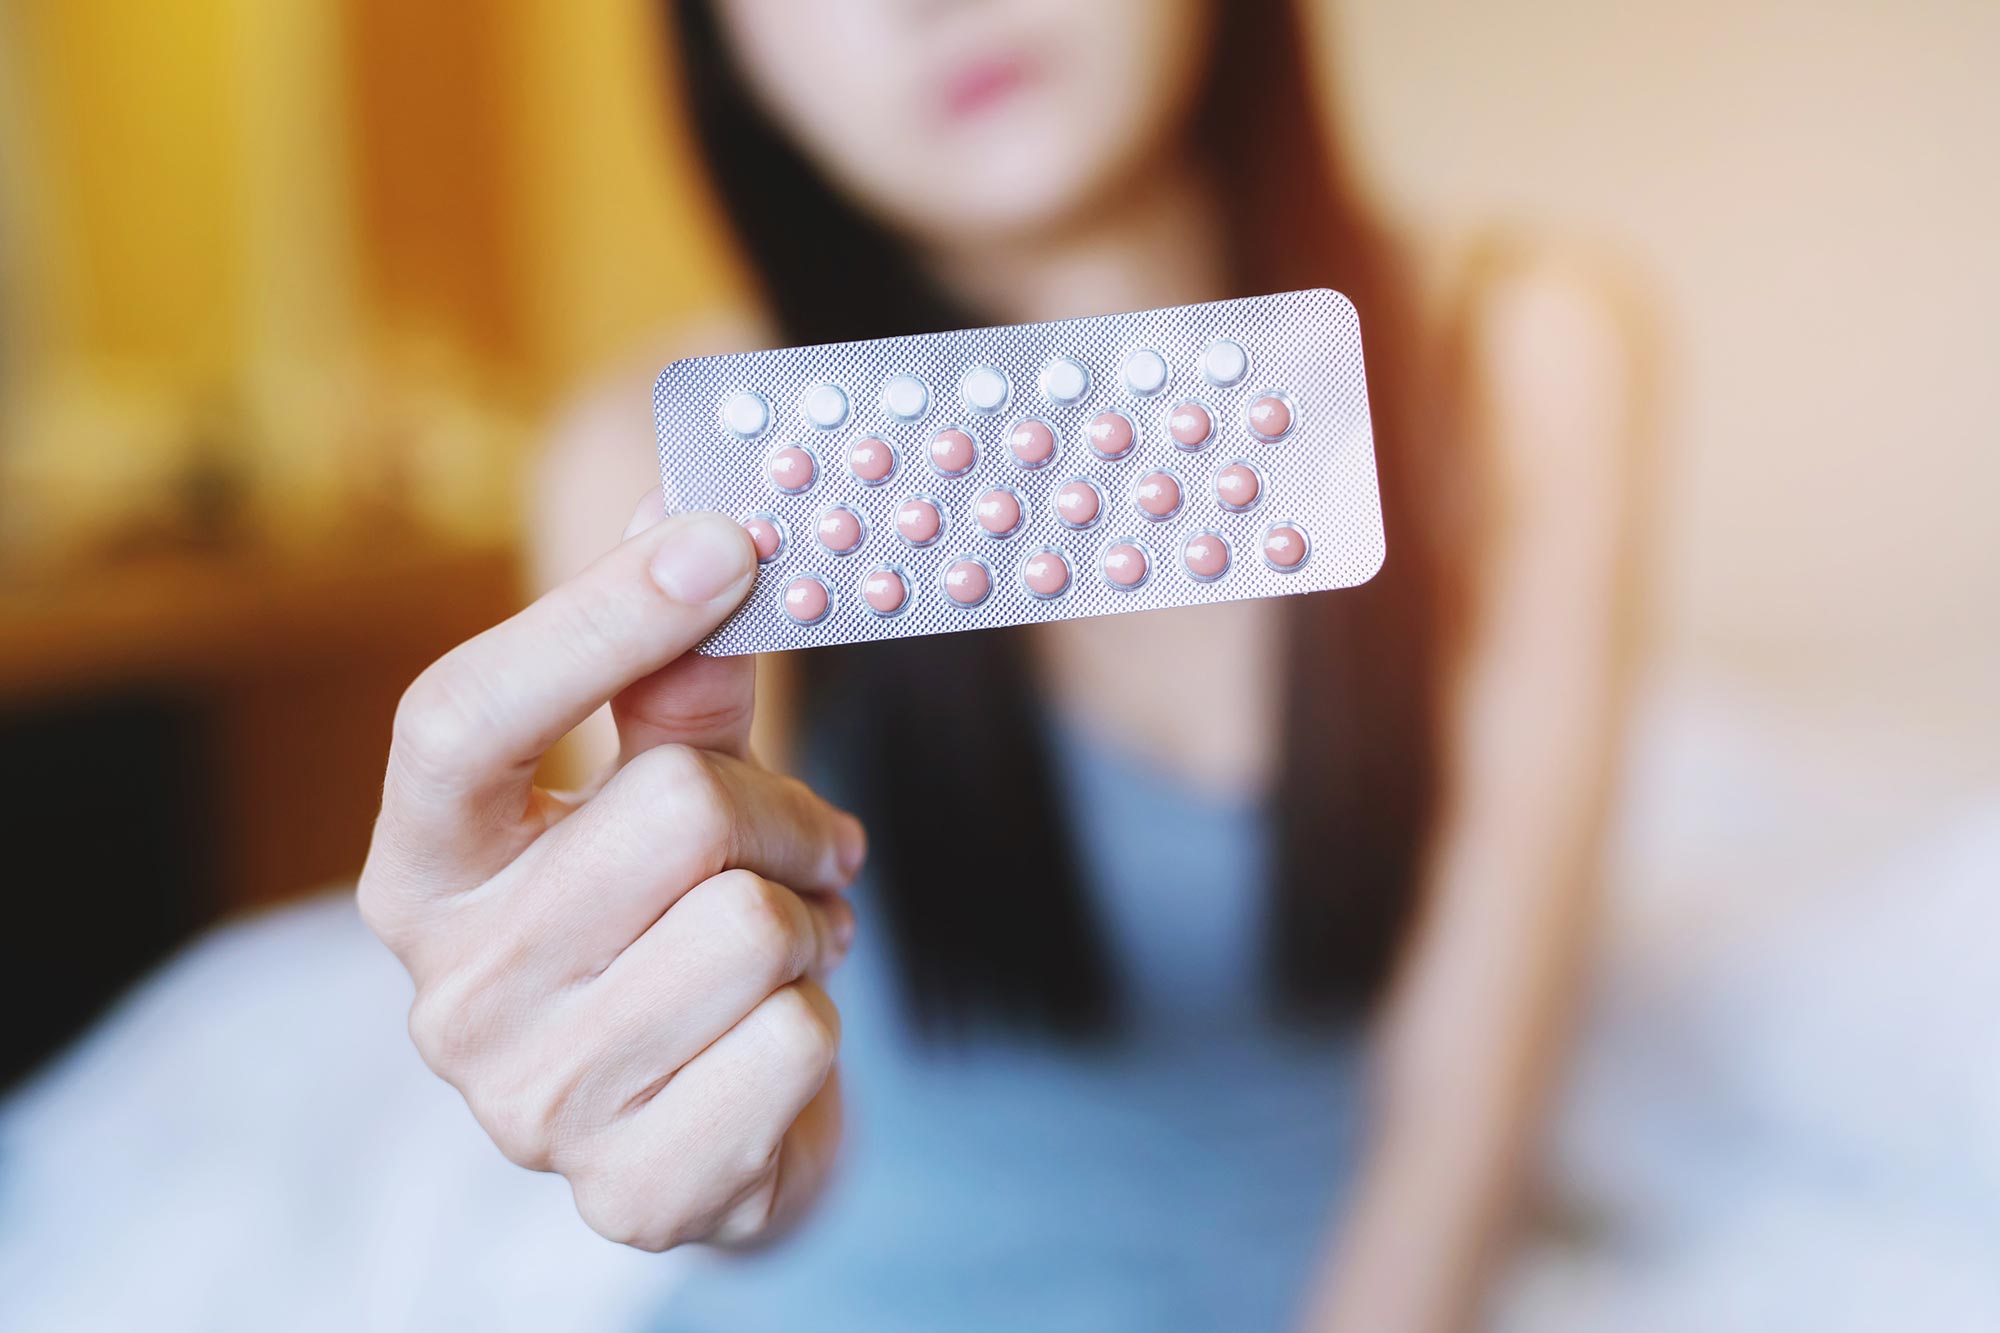 Using Common Painkillers Alongside Birth Control Pills Increases Your Risk of Blood Clots